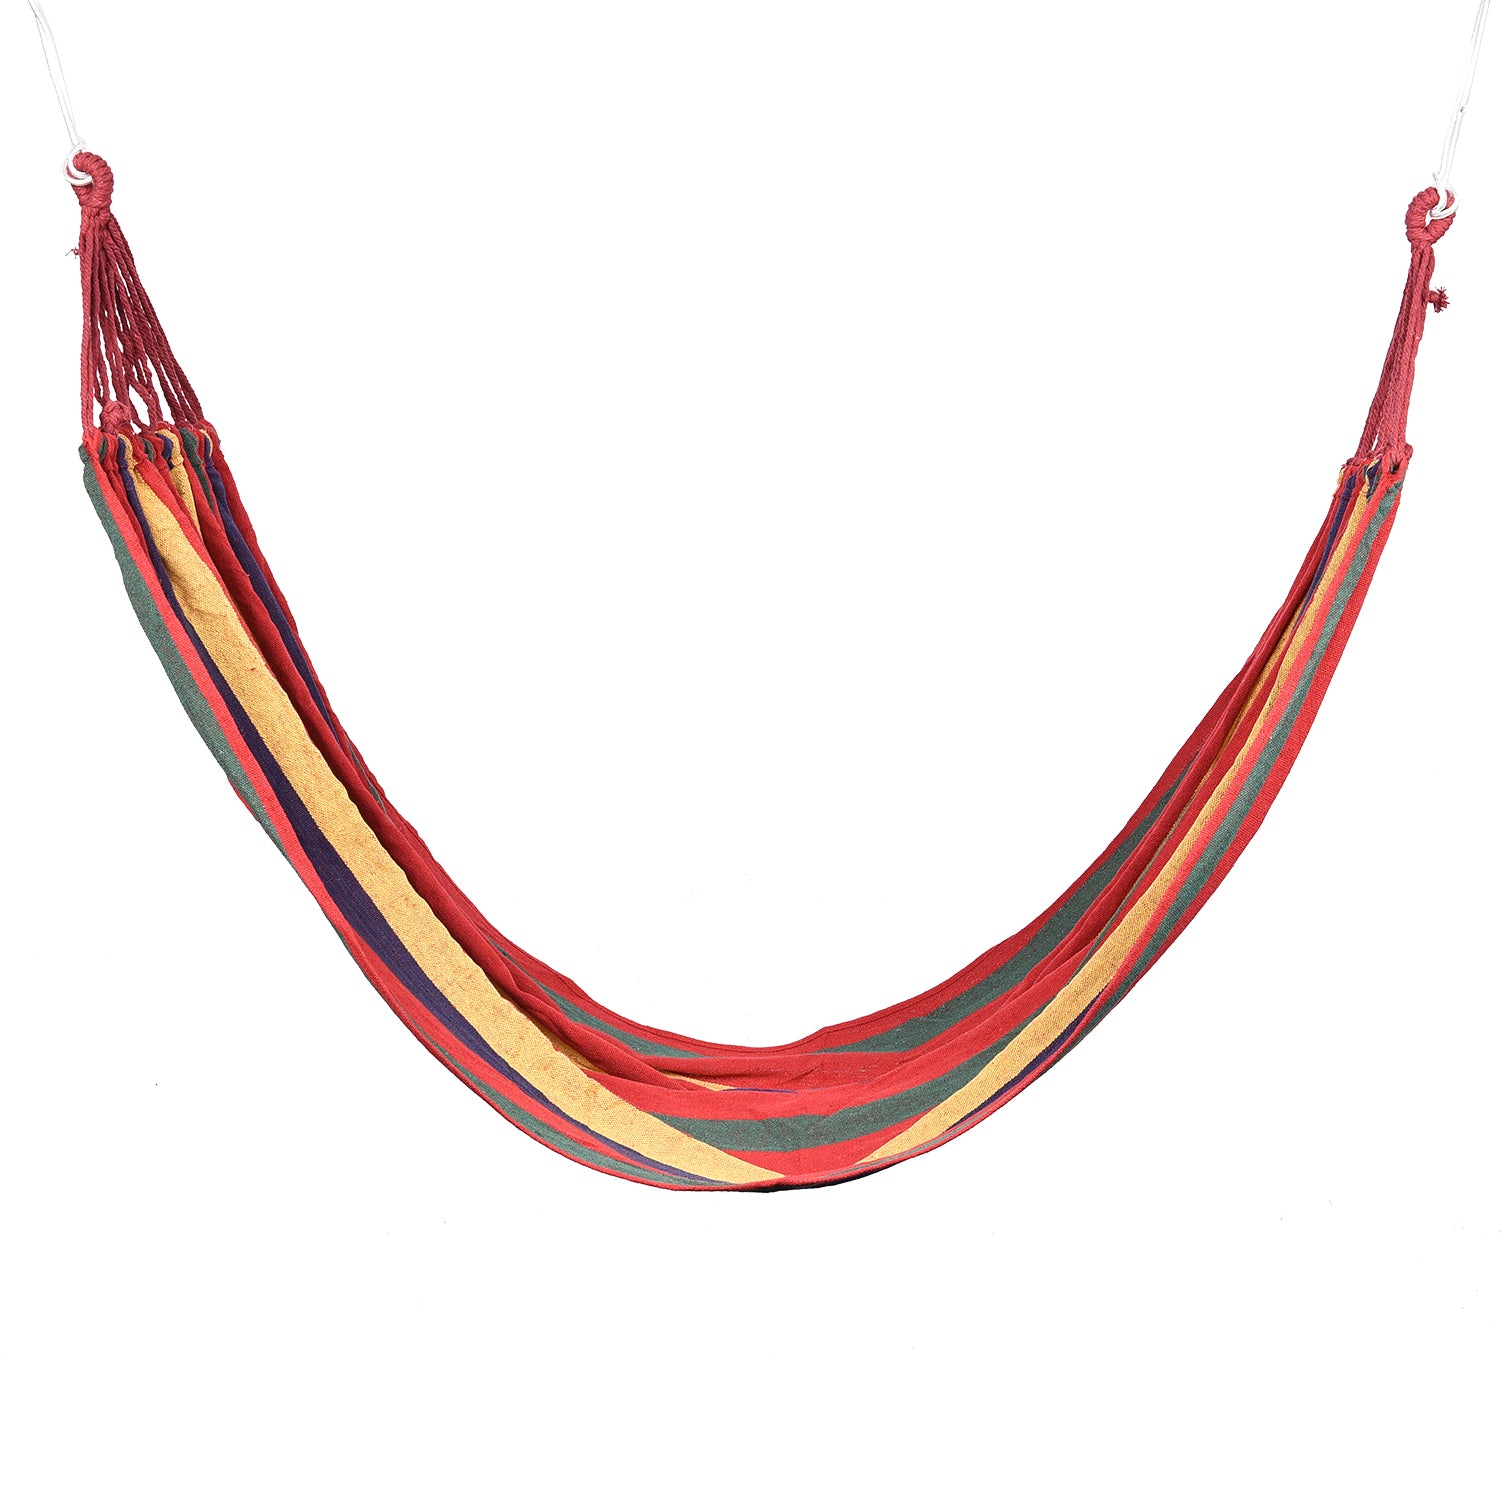 Shop LC Indoor Outdoor Colorful Striped Canvas Camping Hammock Red Hold Up to 100 Kg